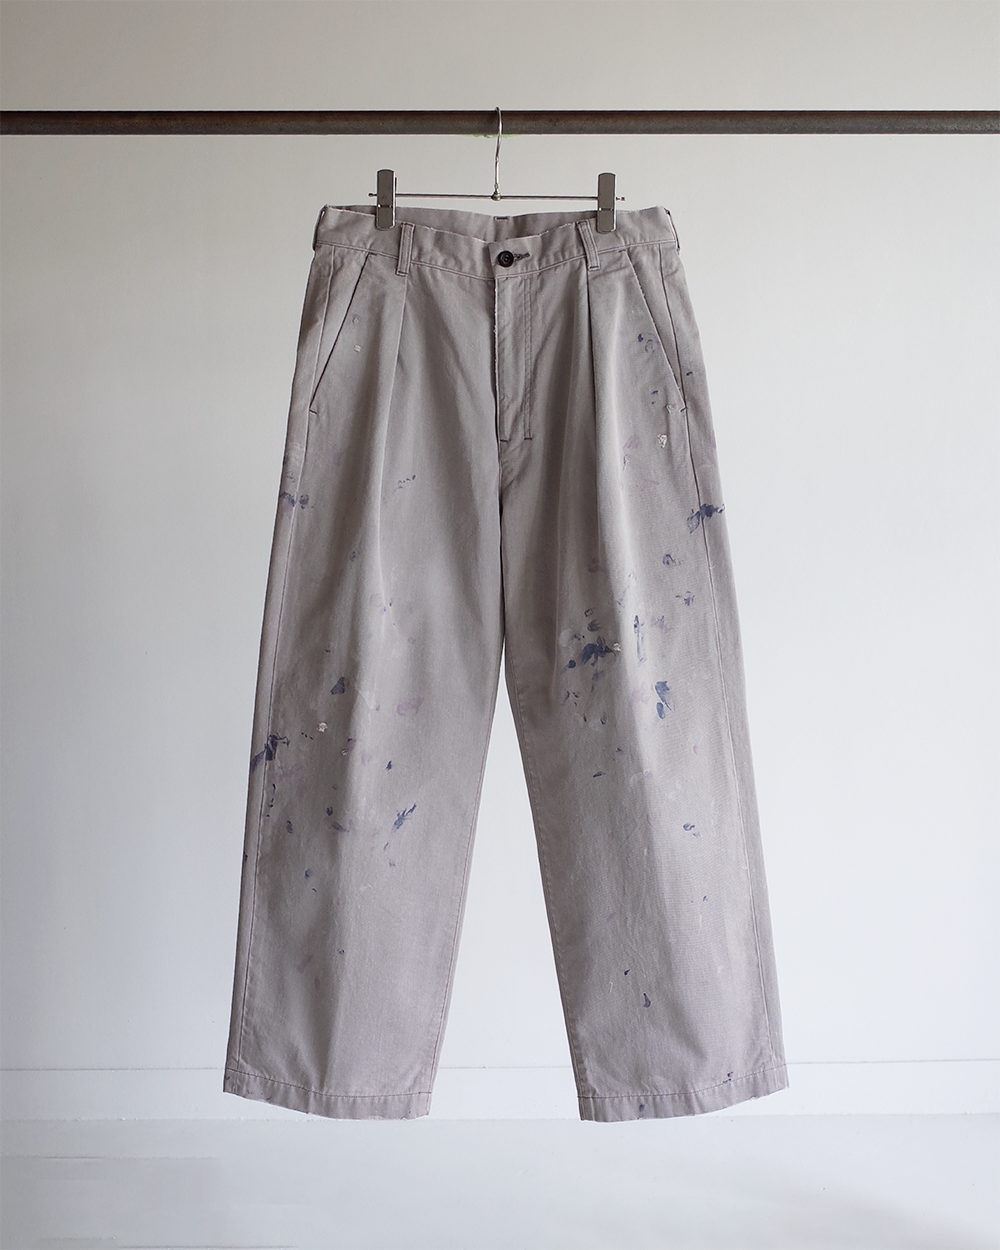 ANCELLM PAINT CHINO TROUSERS ブラック 1 新品